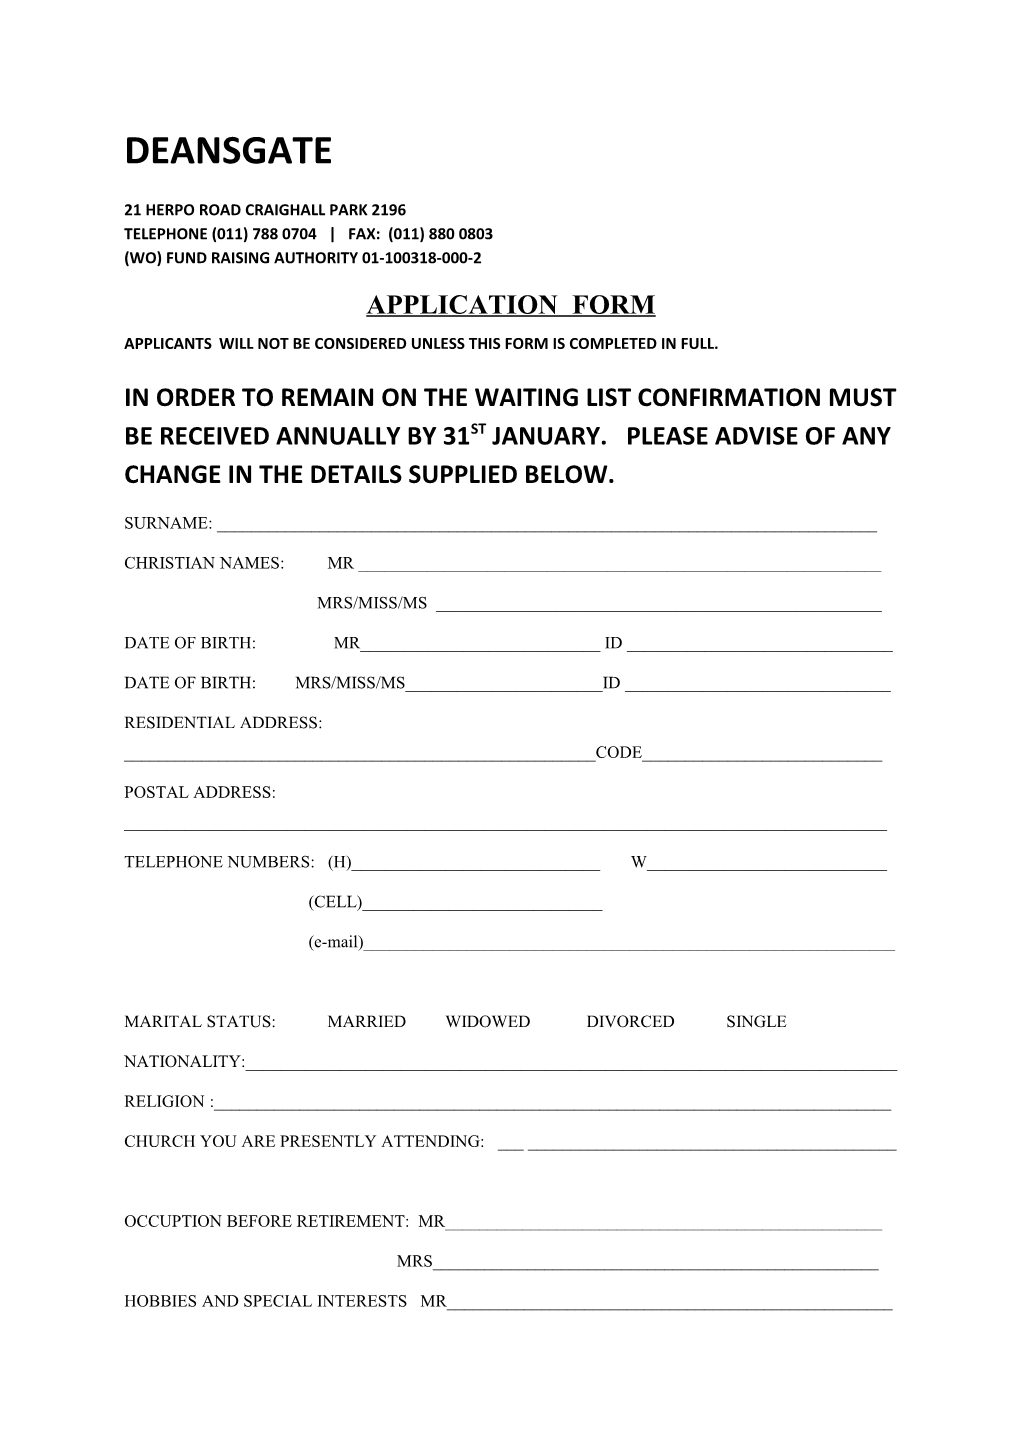 Applicantswill Not Be Considered Unless This Form Is Completed in Full